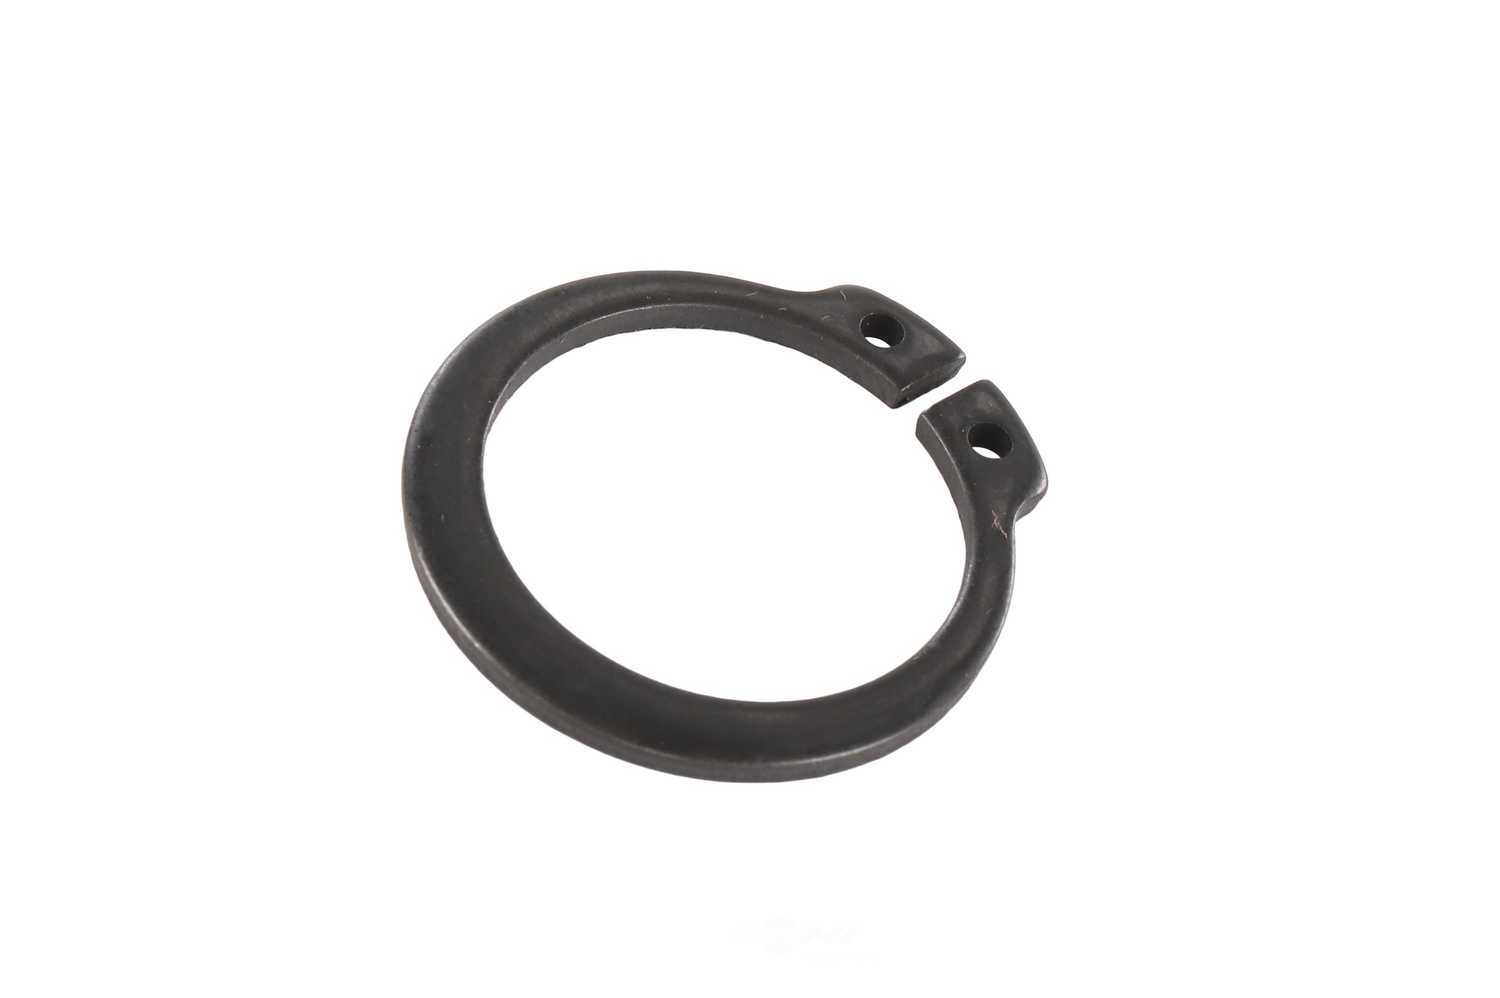 GM GENUINE PARTS - Manual Transmission Gear Snap Ring - GMP 12541299